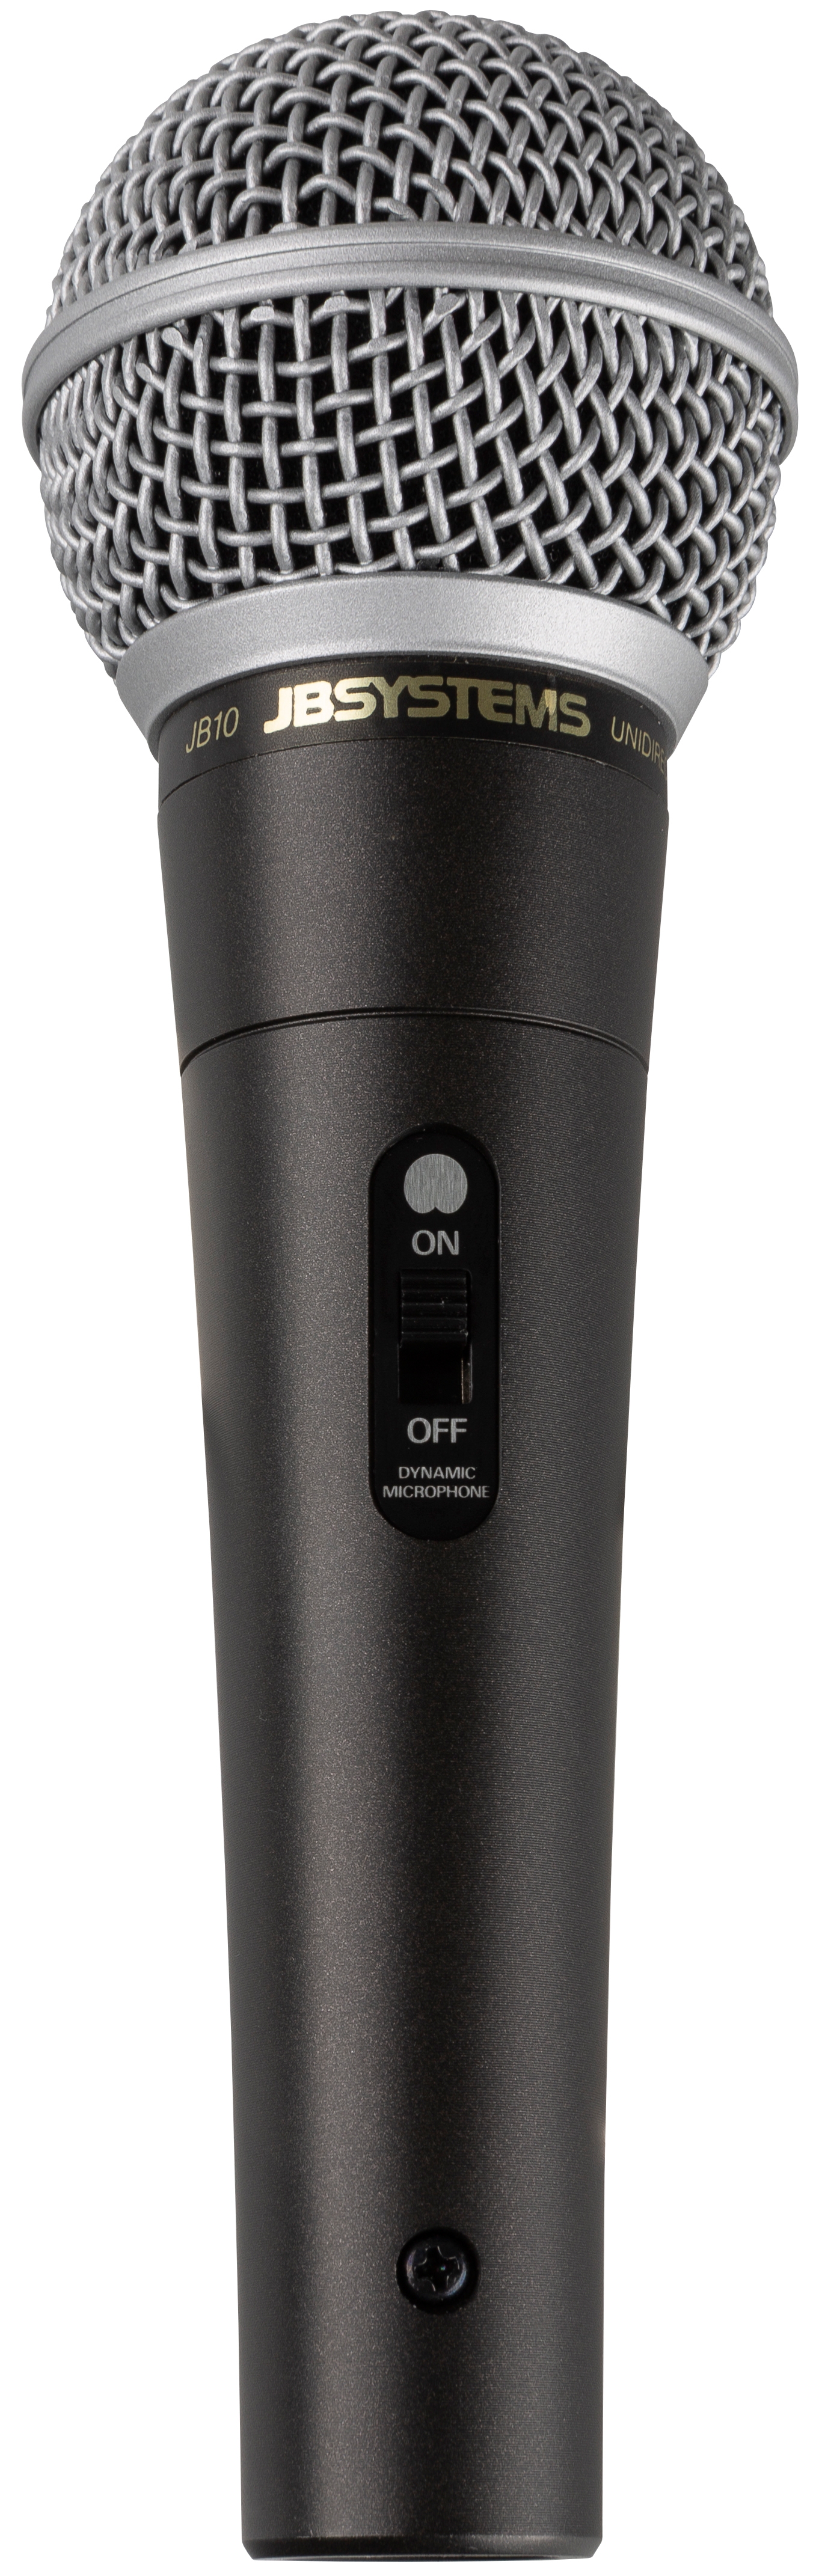 Dynamic professional microphone